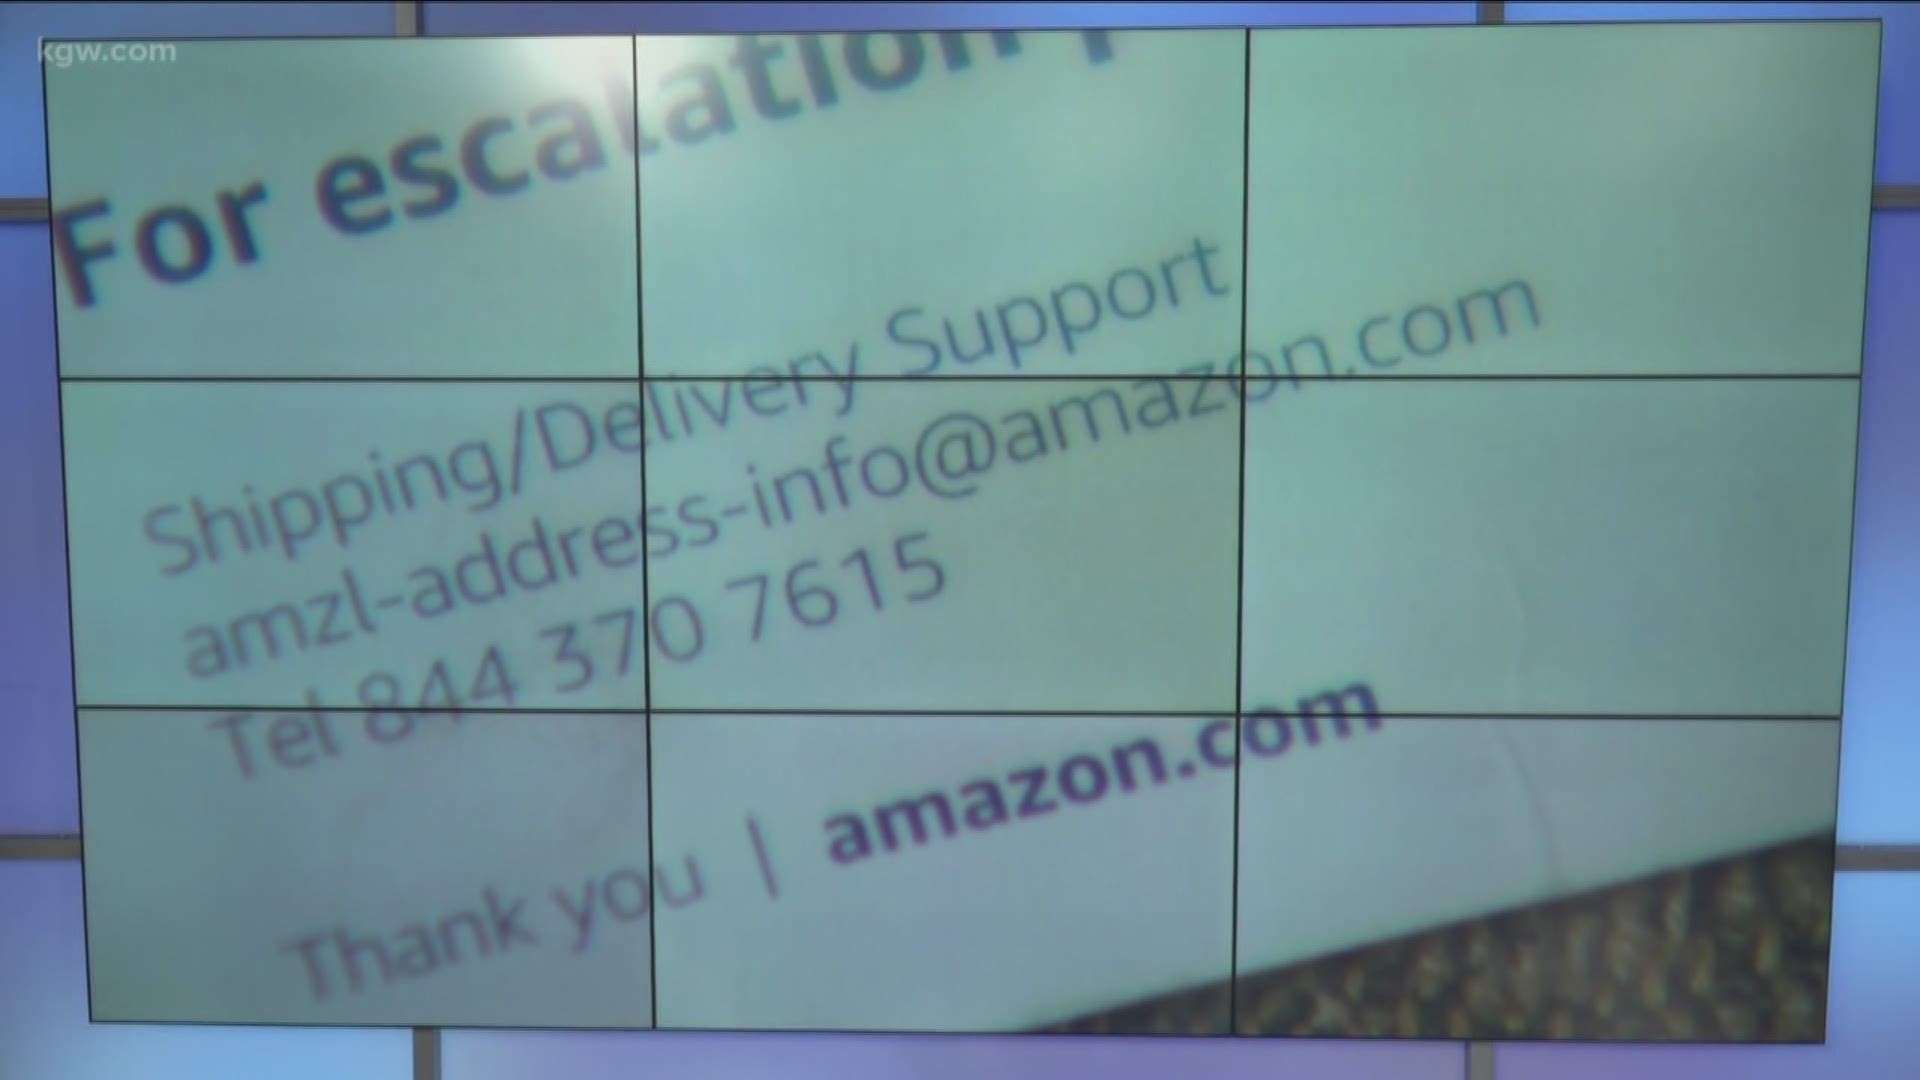 A man going door-to-door claiming to be checking addresses for Amazon had a Damascus man worried and people on the Next Door app buzzing about a scam.